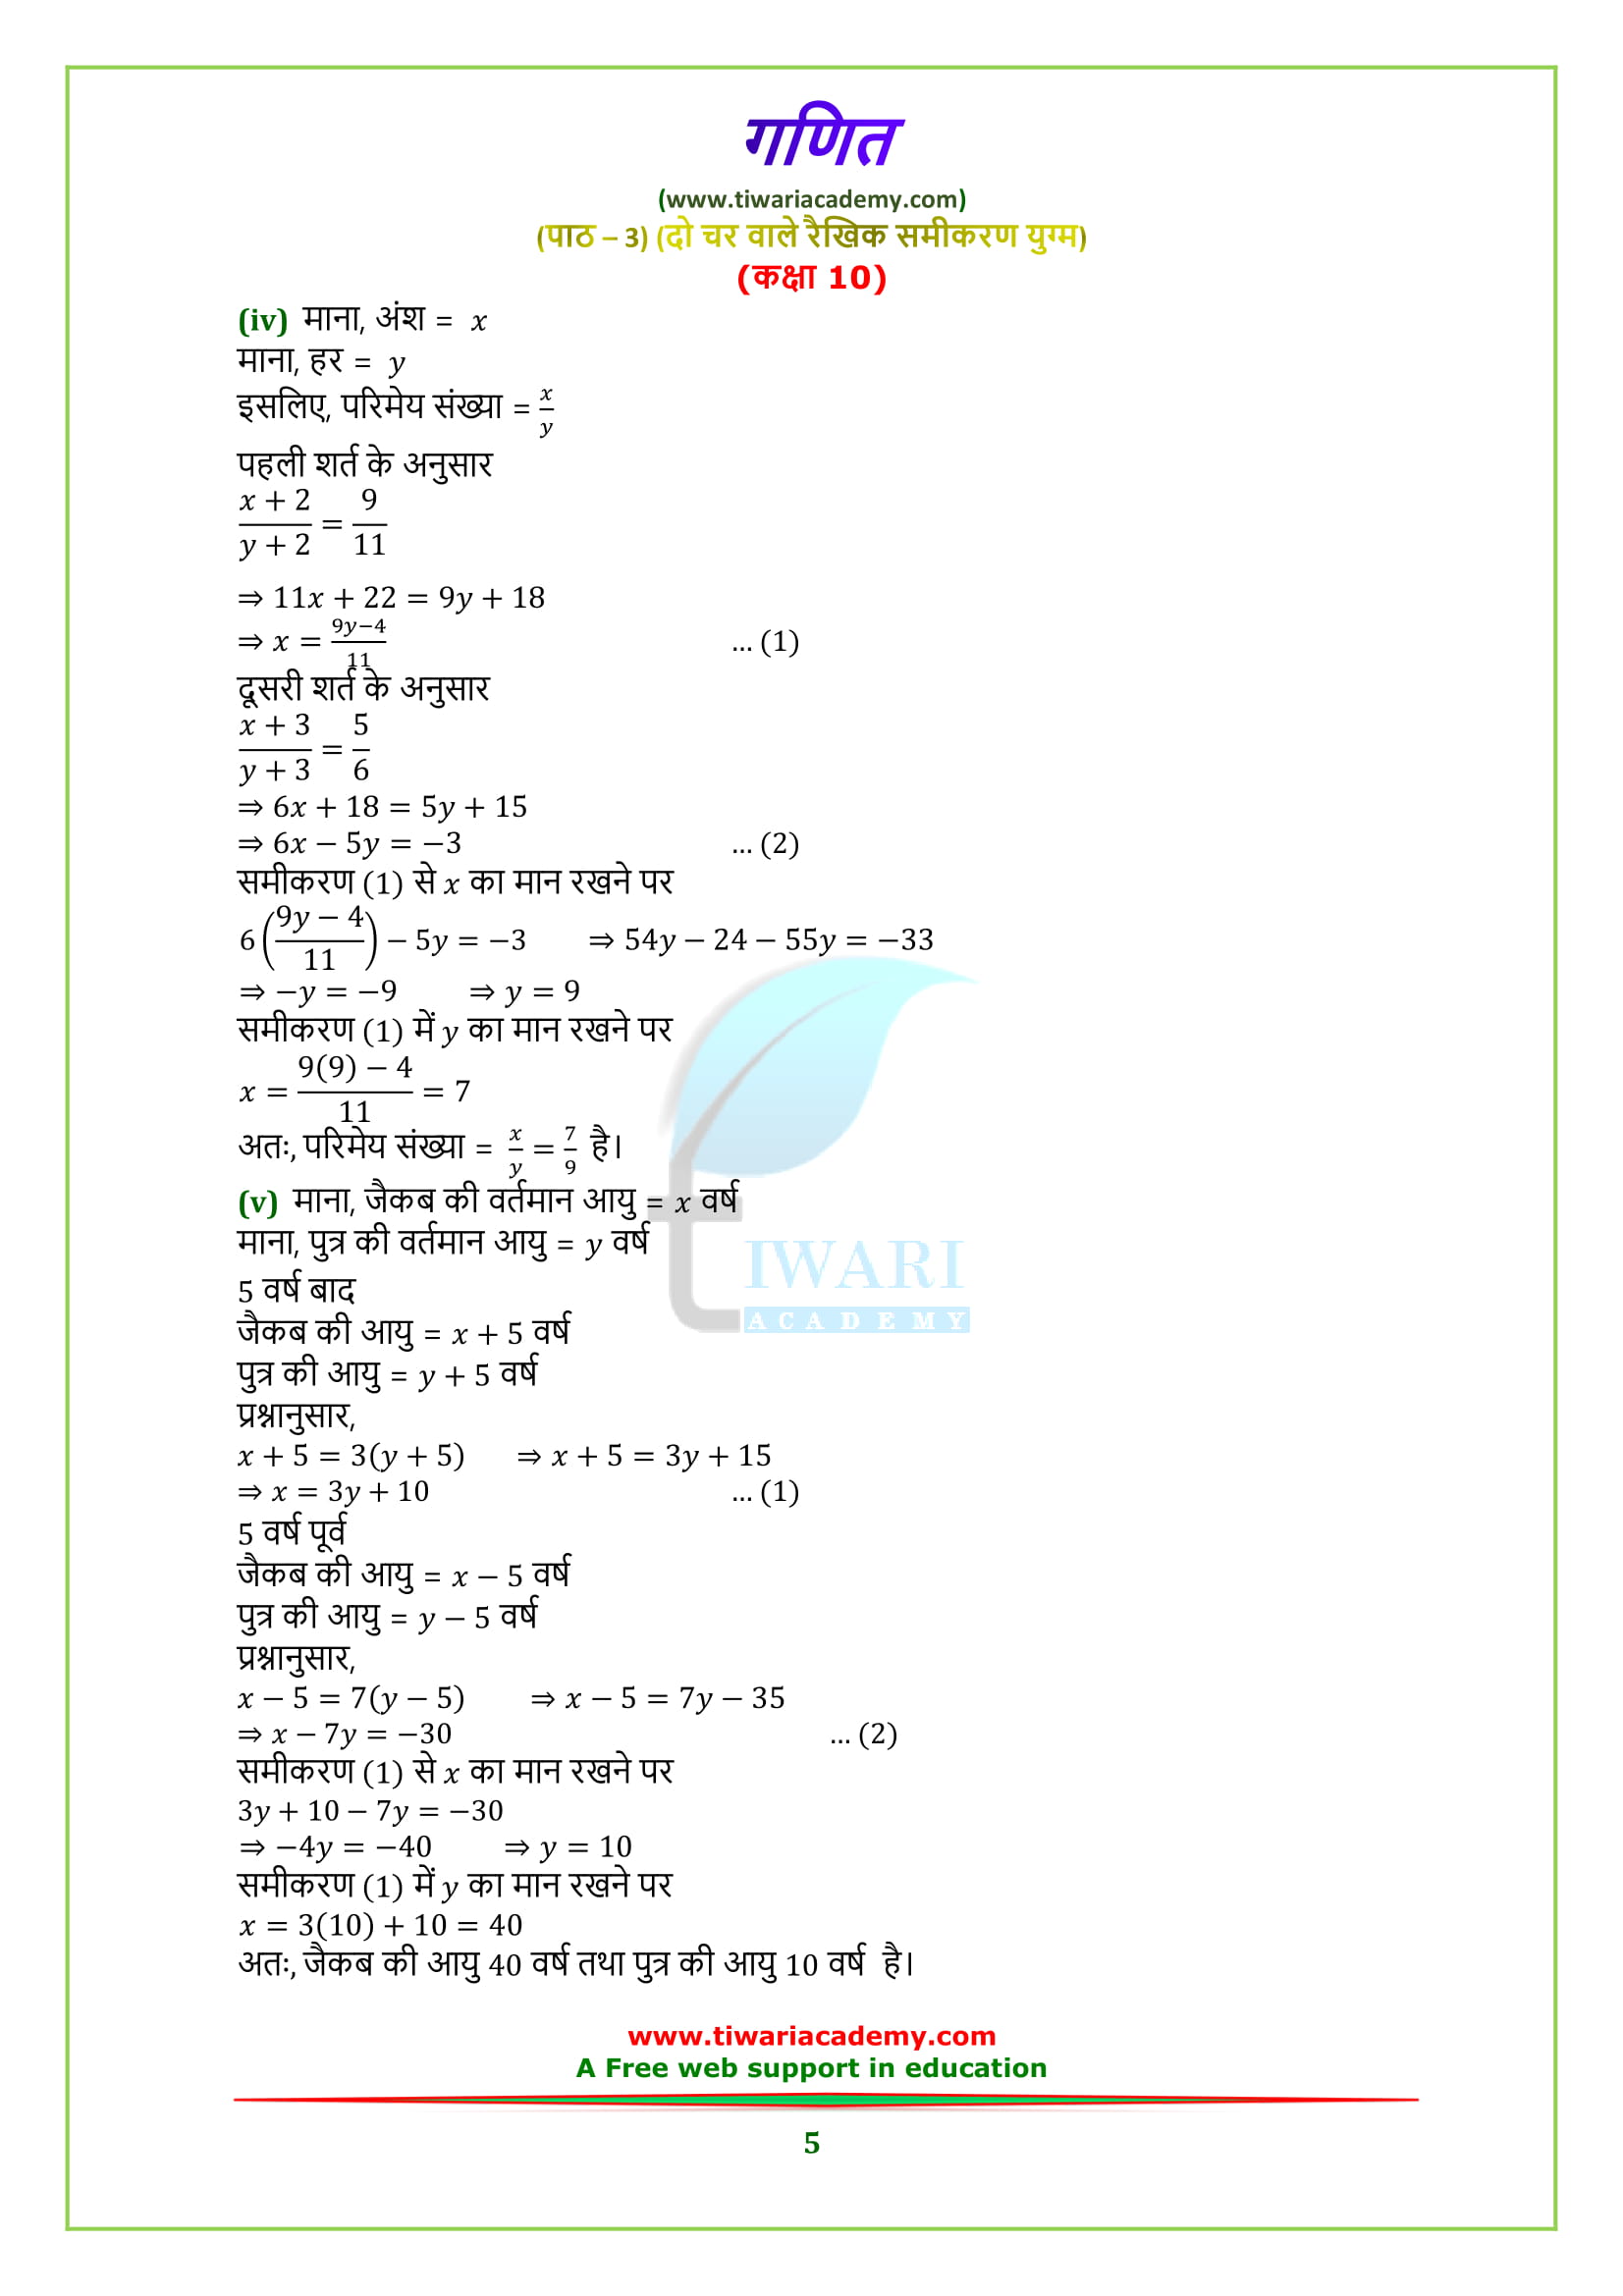 ncert solutions for class 10 maths chapter 3 exercise 3.3 in hindi medium